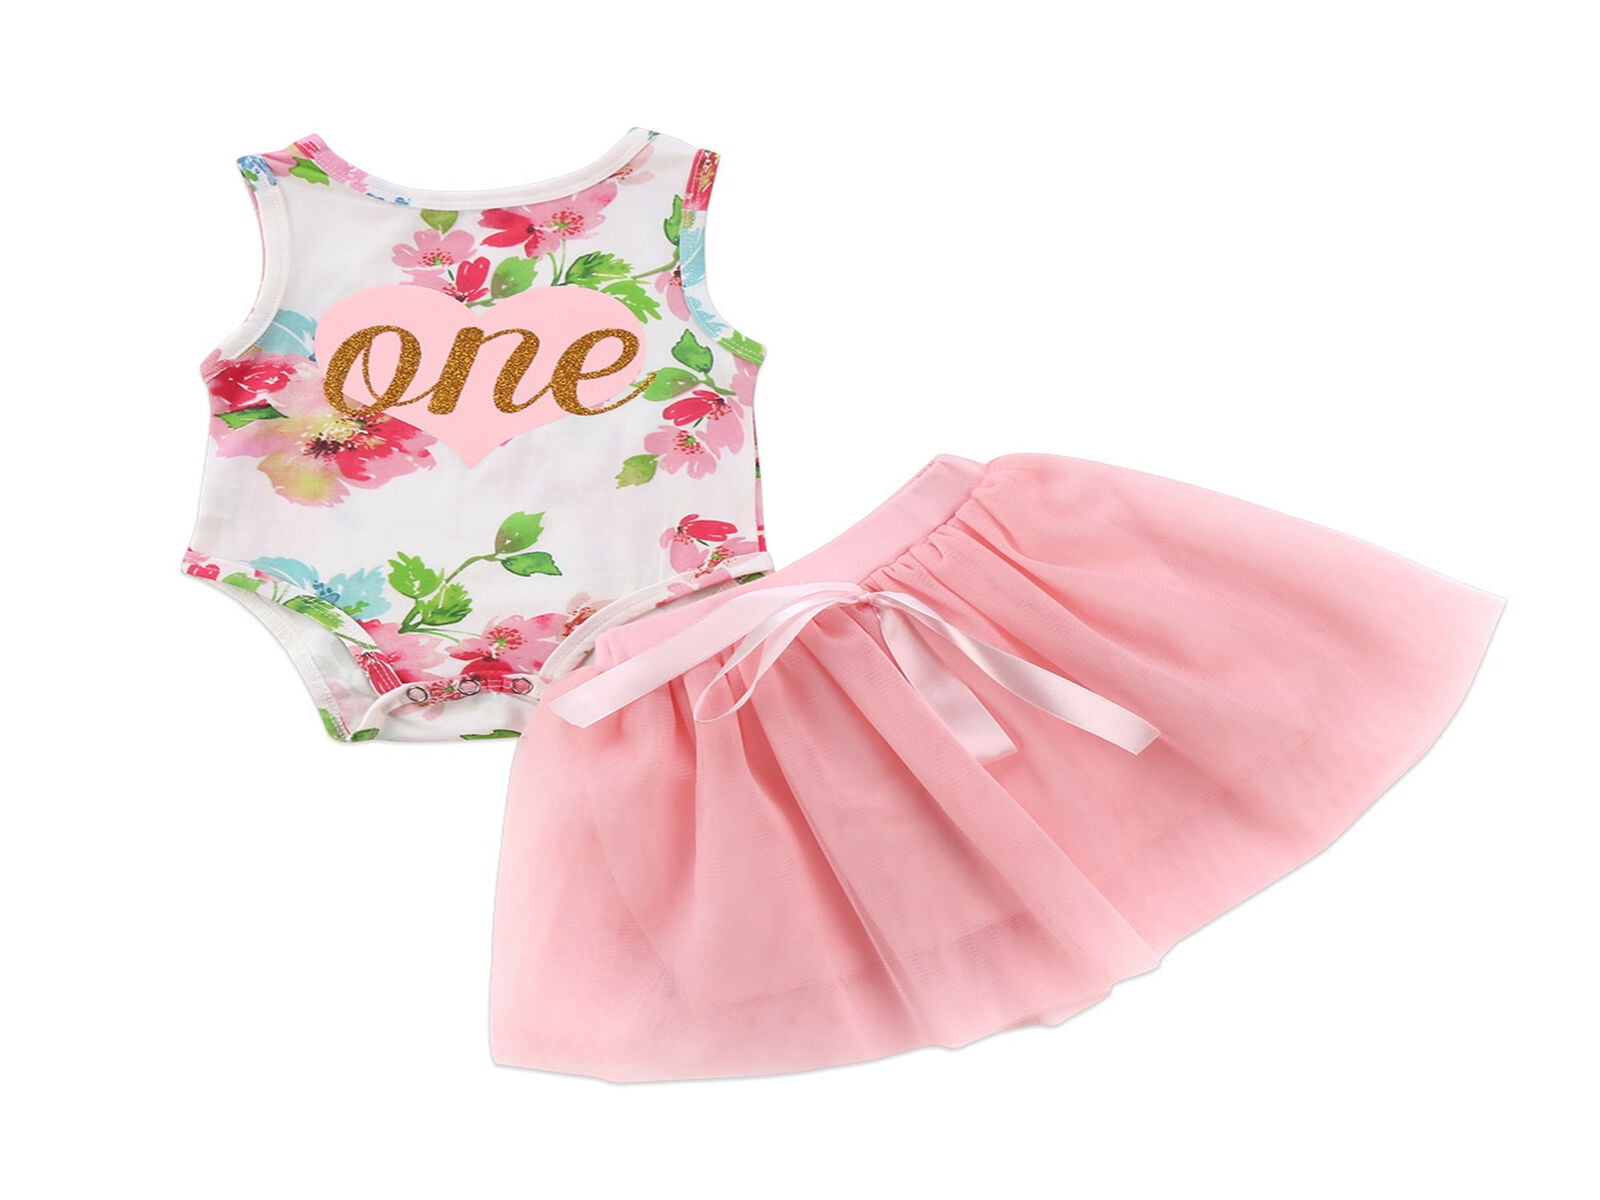 Cute Newborn Baby Girl 1st Birthday Party Dress Floral Romper Tutu Skirt Clothes 